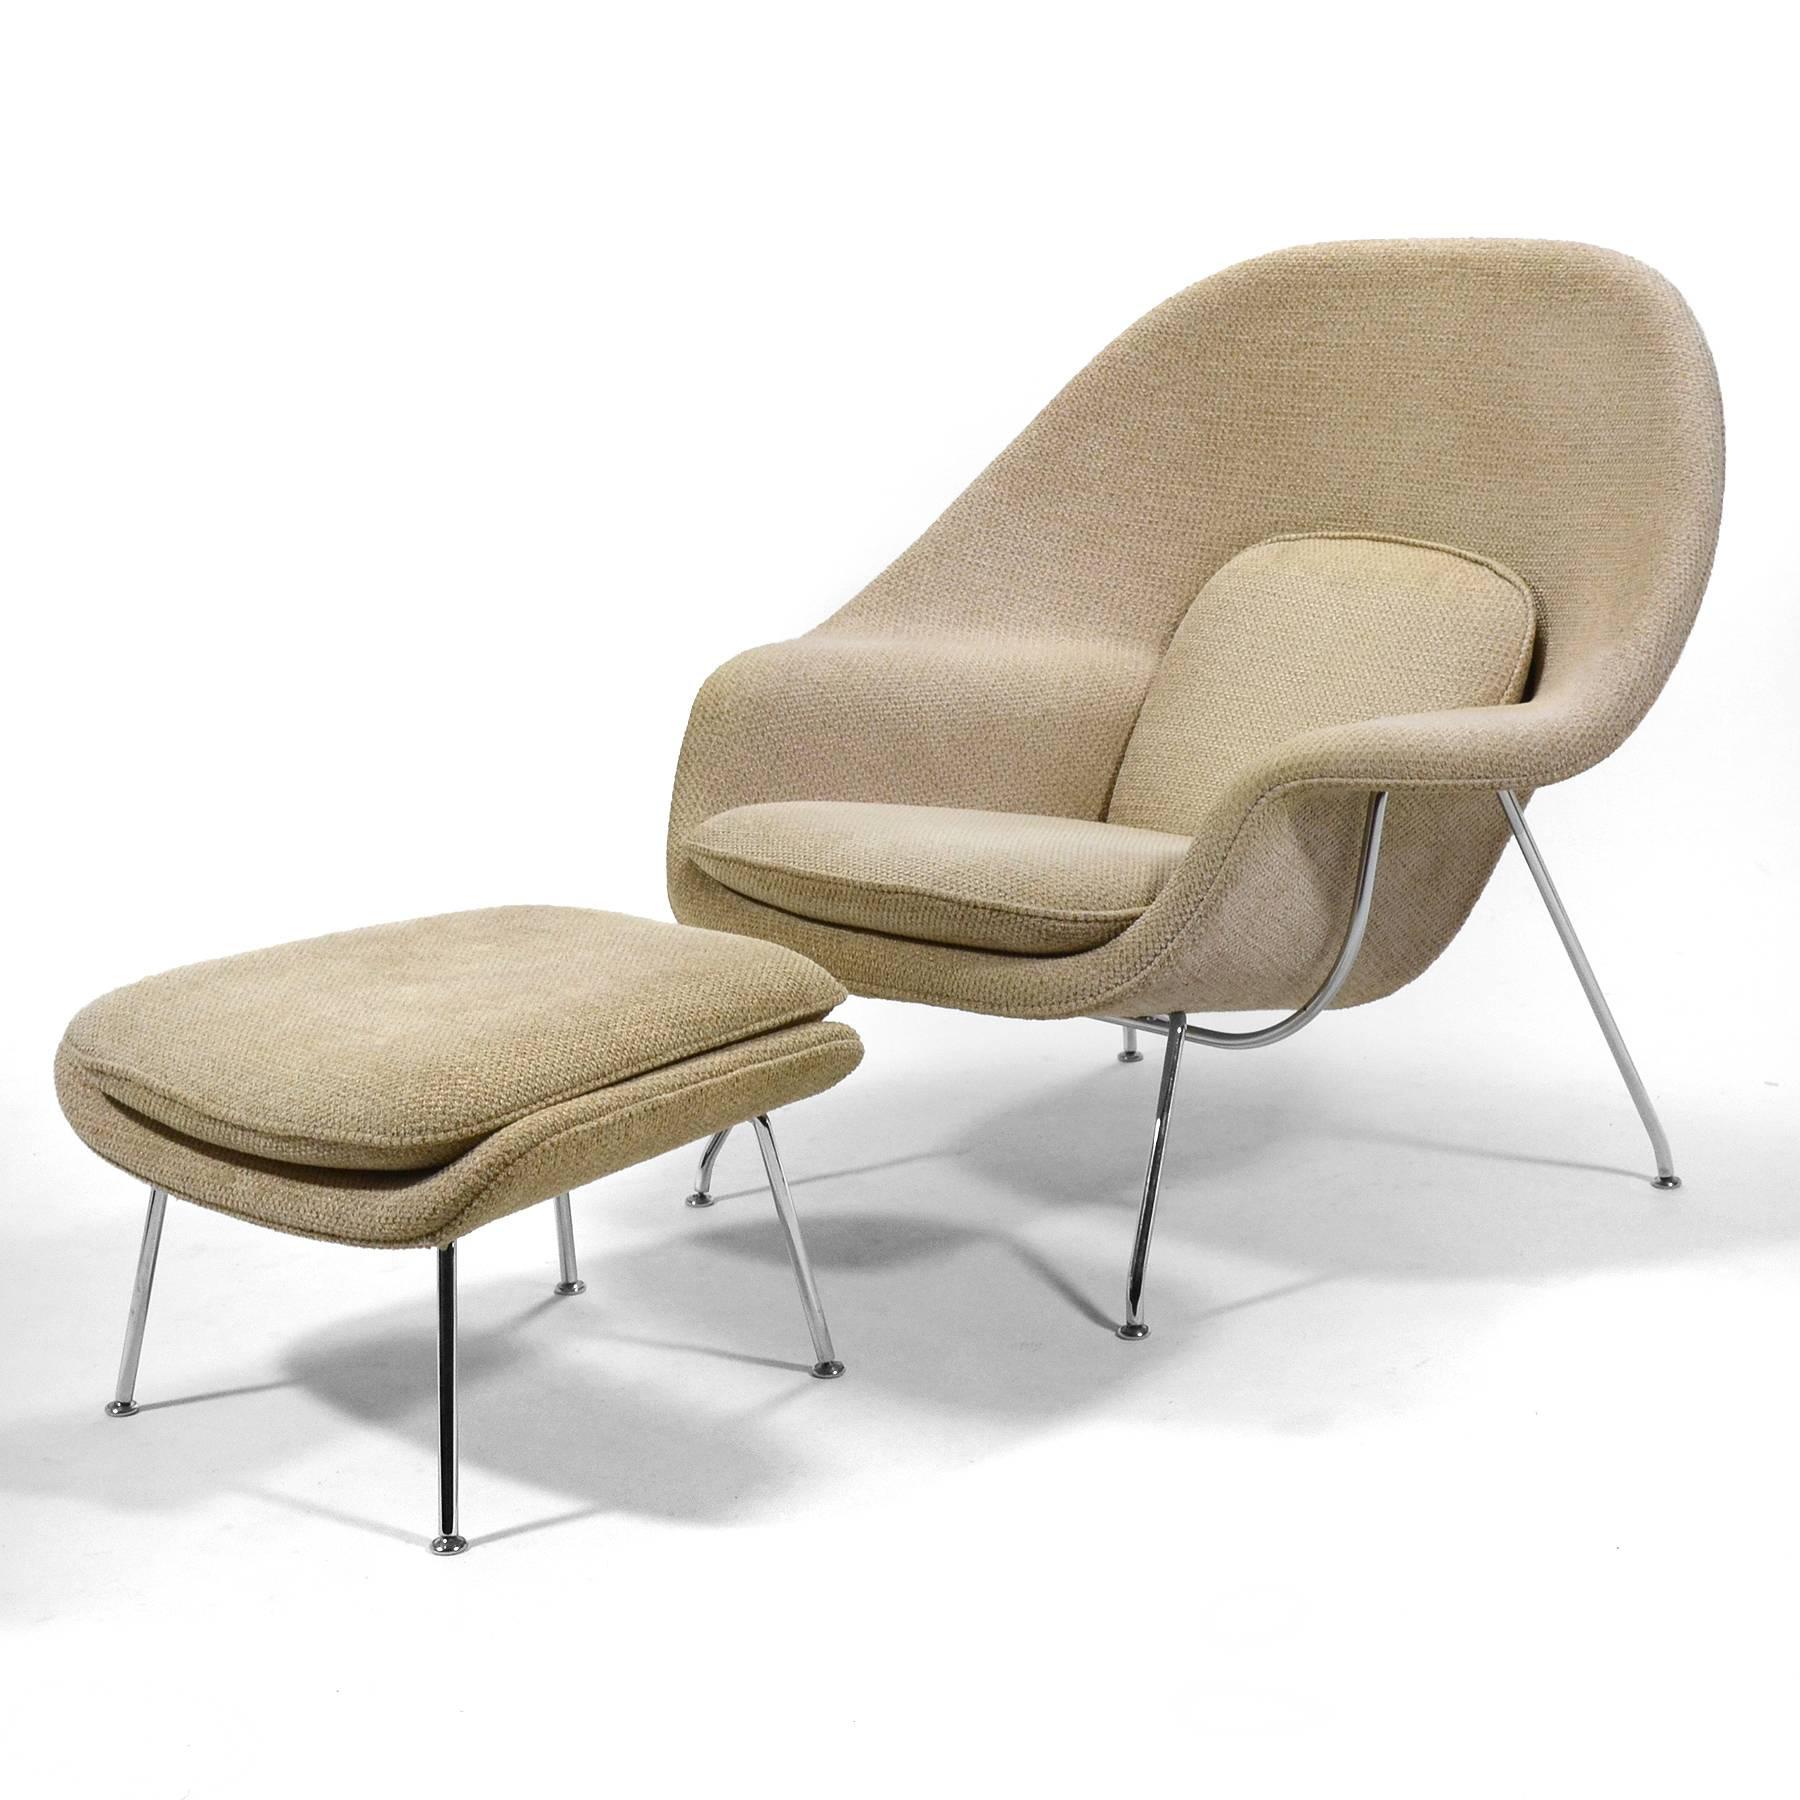 Saarinen's iconic lounge chair and ottoman in a rich, textural fabric. One of the most generous and comfortable modern easy chairs ever designed.

 This chair and ottoman were in a light-filled condo in a highrise. The fabric has been lightened a